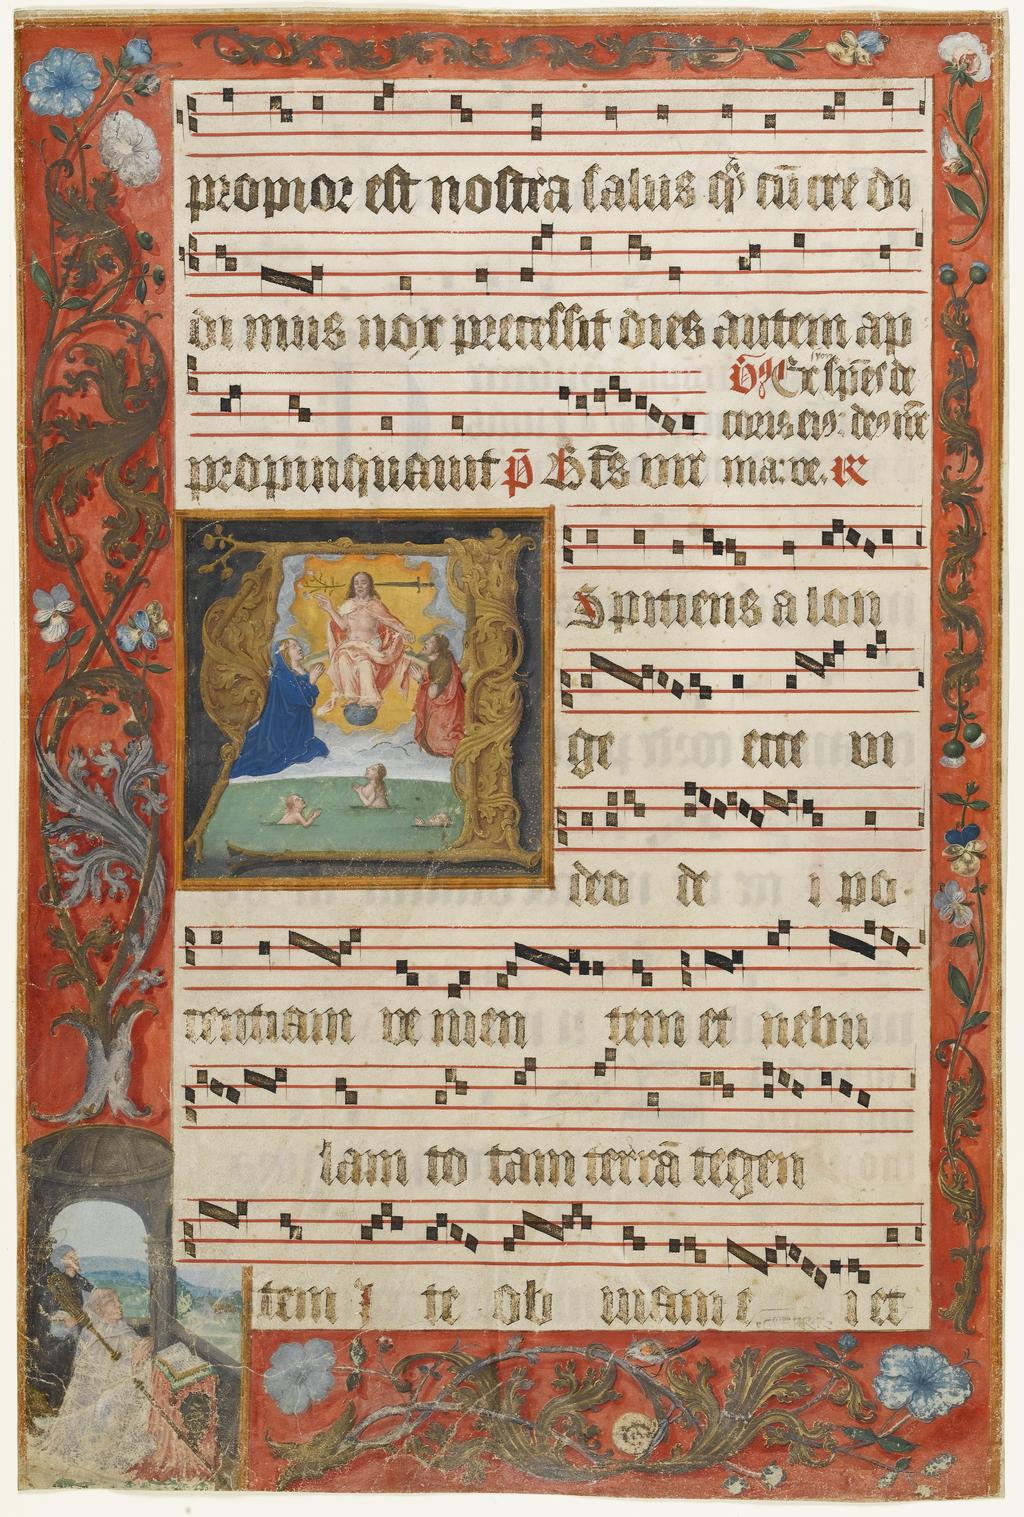 An image of Illuminated Manuscript. Leaf from an Antiphoner. Parchment, trimmed along the border frame, 460 x 305 (385 x 230) mm, 9 lines of text ruled in faint brown ink and 9 four-line music staves ruled in red. Ilumination, penwork, gold. Production place: Brabant, Antwerp, probably. Circa 1520-circa 1530. CONTENTS: Matins antiphons and response Aspiciens a longe for the first Sunday in Advent. DECORATION: Historiated initial [A, 3 ll.] formed of bronze acanthus leaves and enclosing the Last Judgement, with full acanthus and strewn-flower border showing a Cistercian abbot praying at a lectern and accompanied by his patron saint. ORNAMENTATION: Alternate blue and red penwork one-line initials with red or blue pen-flourished infill and extensions; capitals highlighted in red.